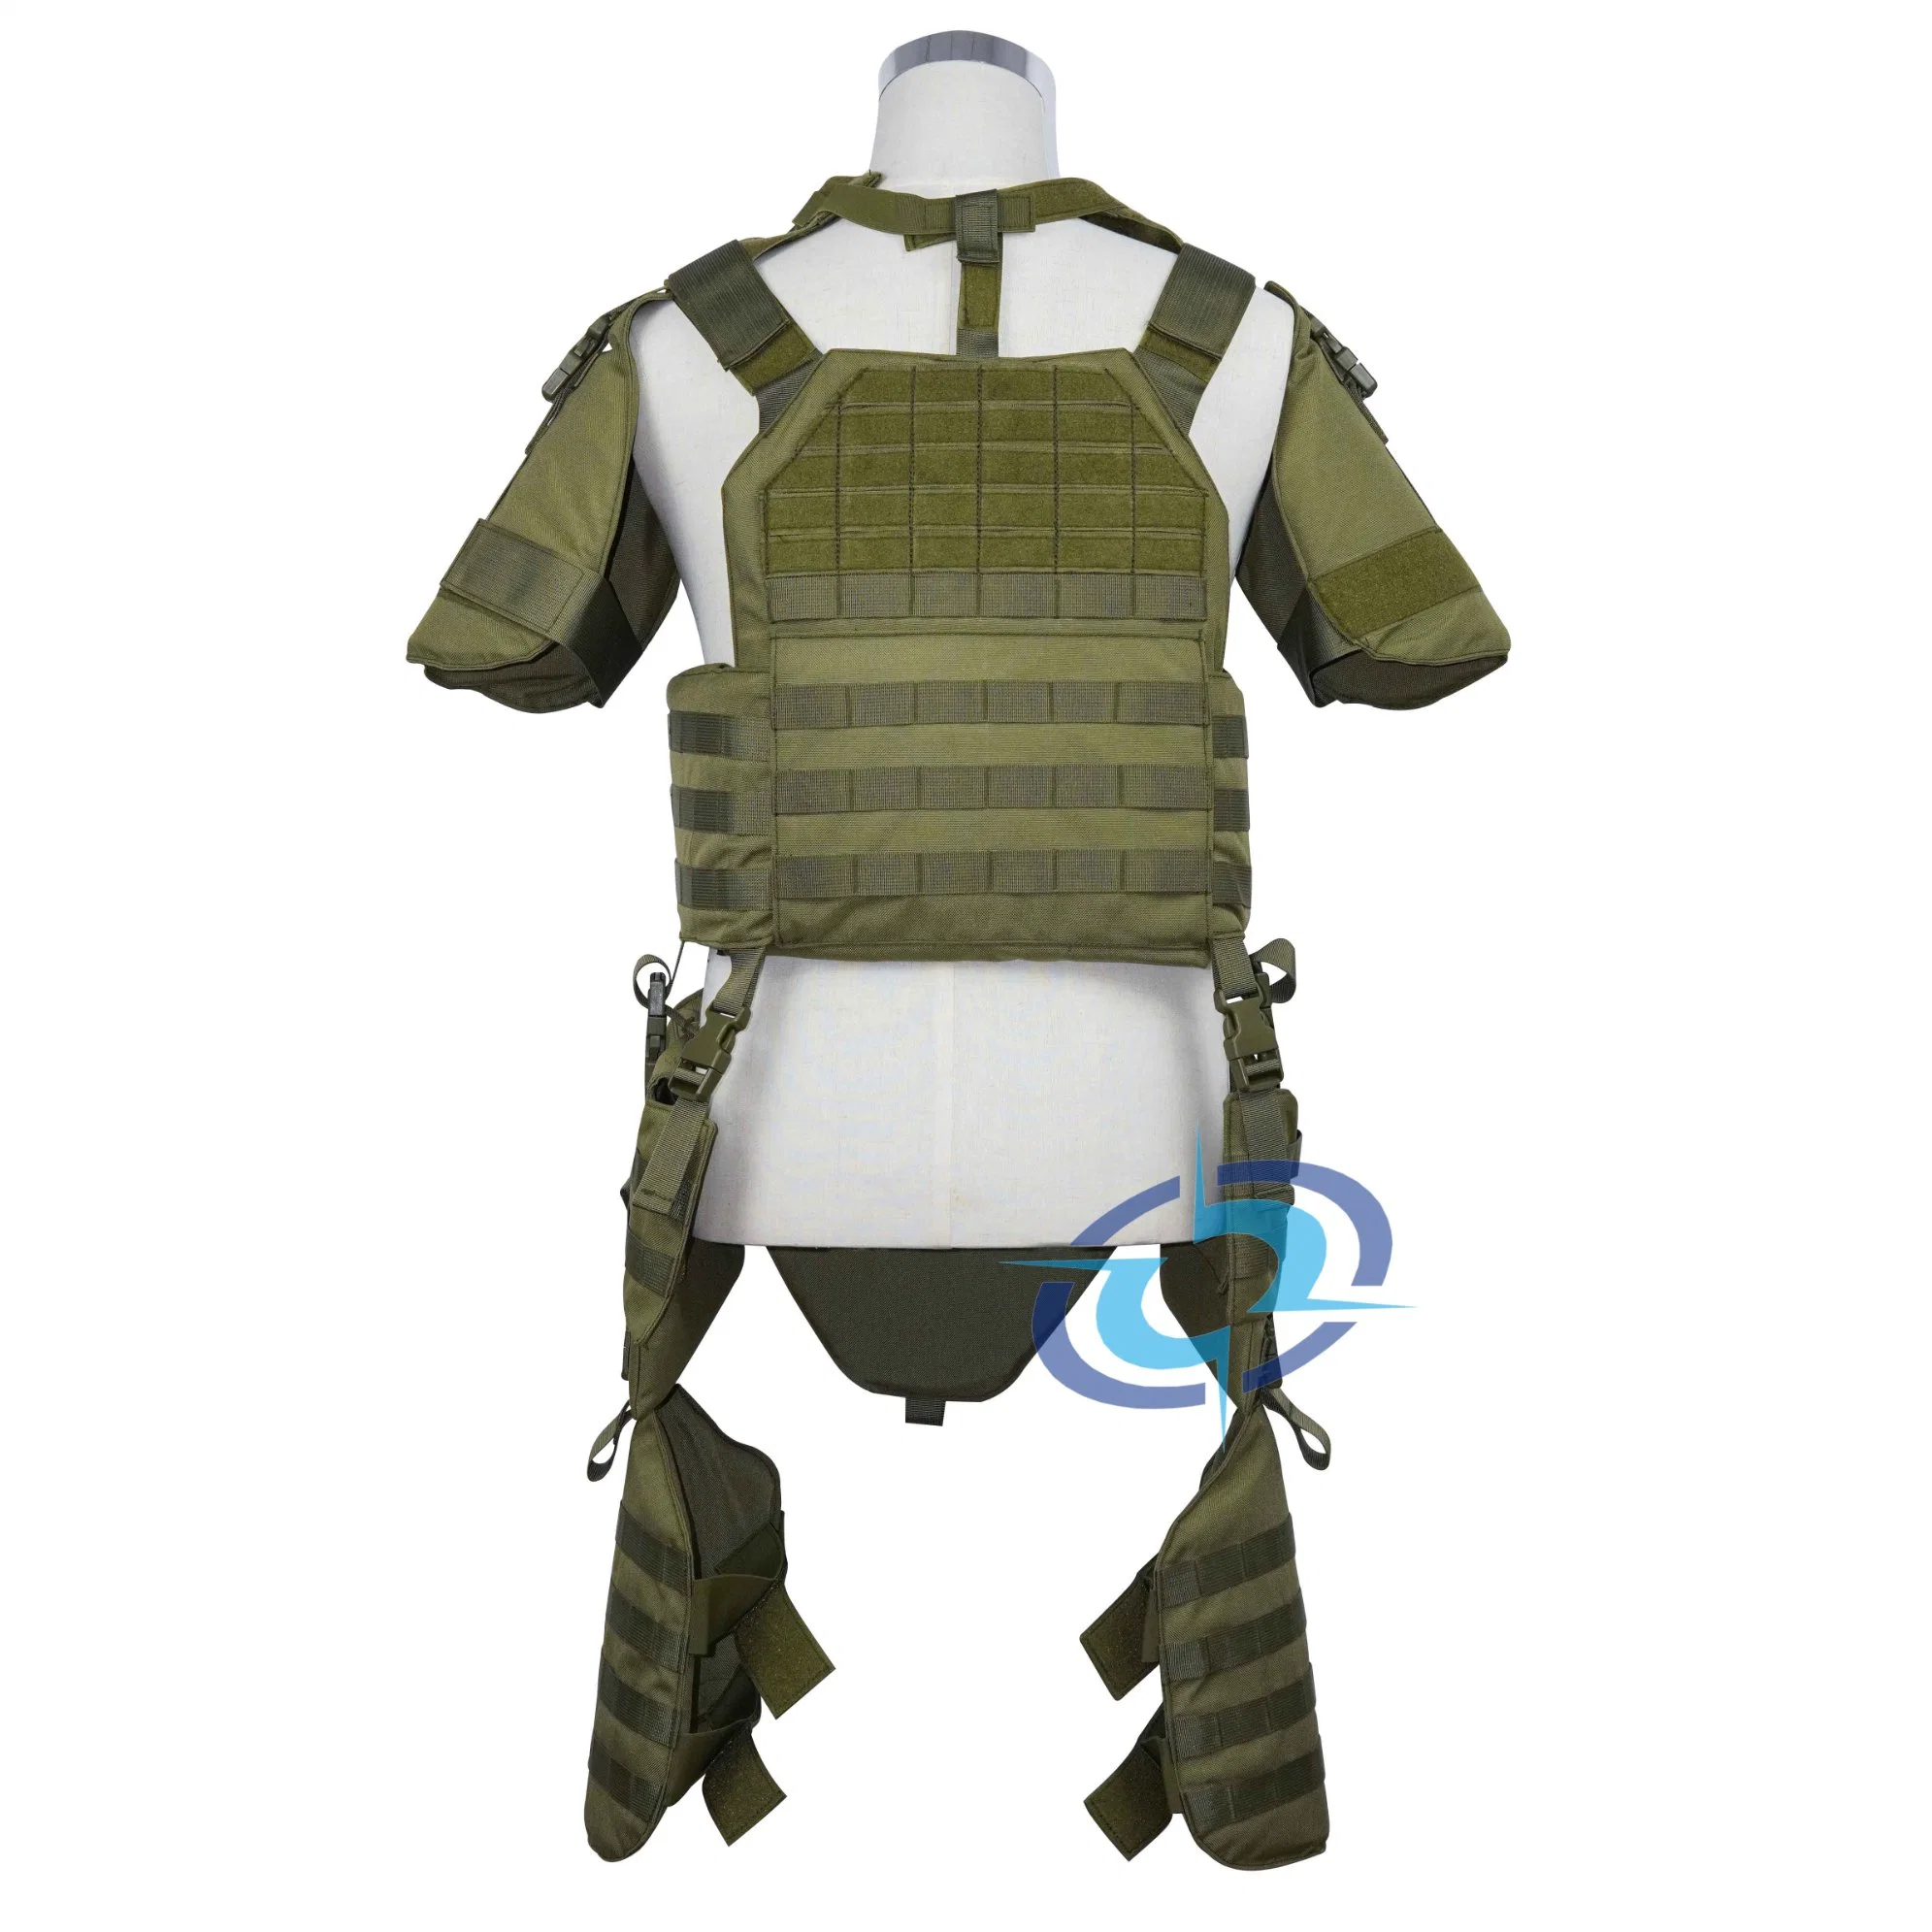 Nij IV Body Armor Police Military Tactical/Combat Full Protection Body Guard Tactical Gear Bulletproof Vest